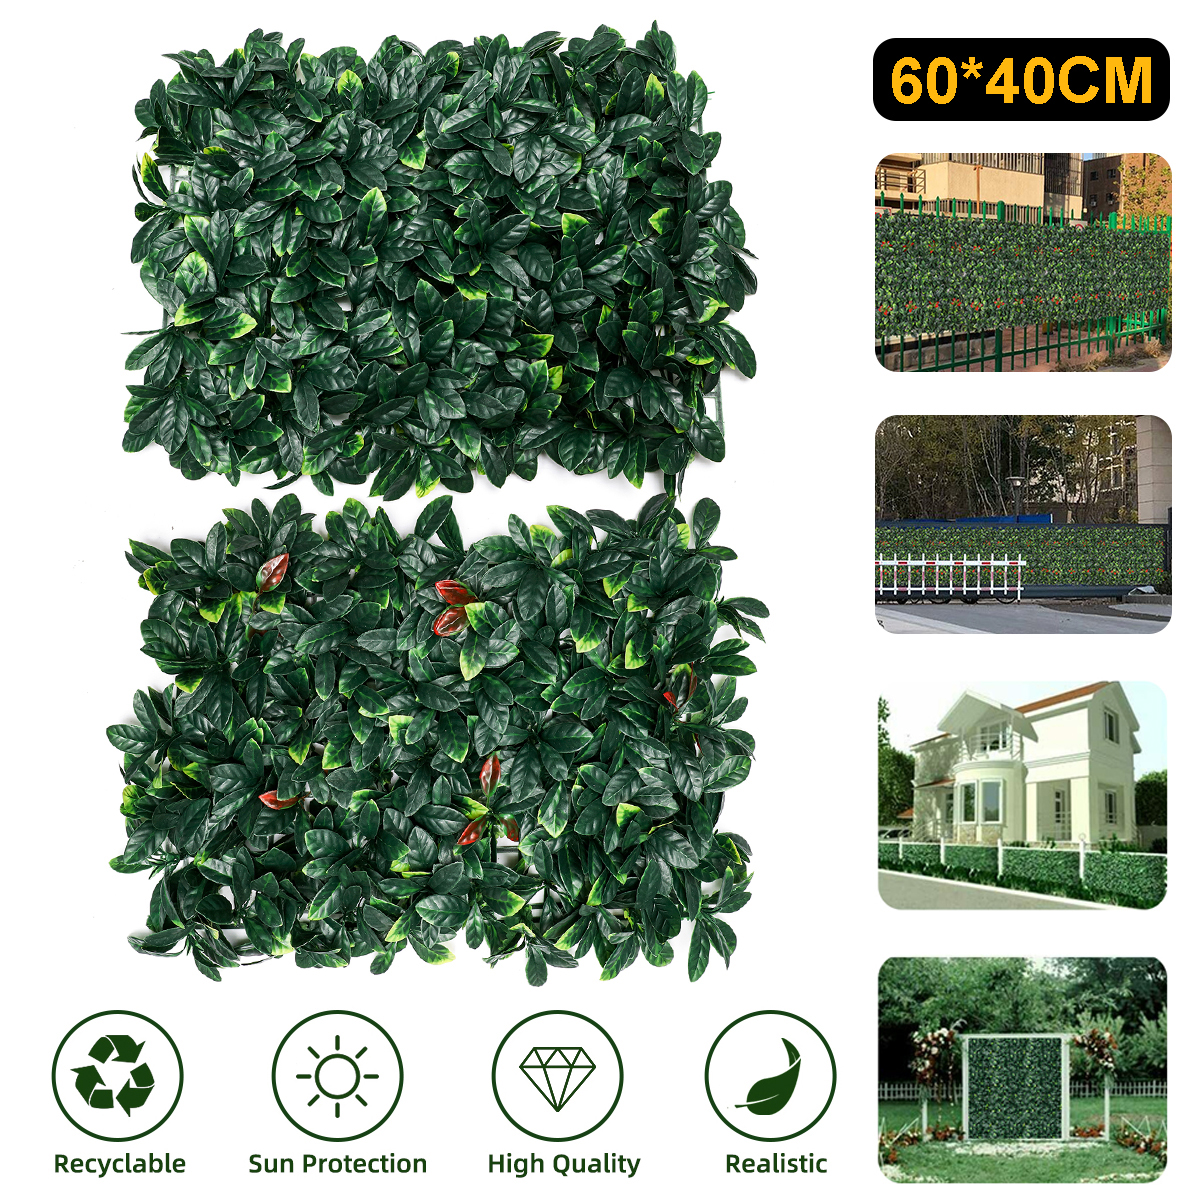 4060CM-Artificial-Topiary-Hedges-Panels-Plastic-Faux-Shrubs-Fence-Mat-Greenery-Wall-Backdrop-Decor-G-1729461-1